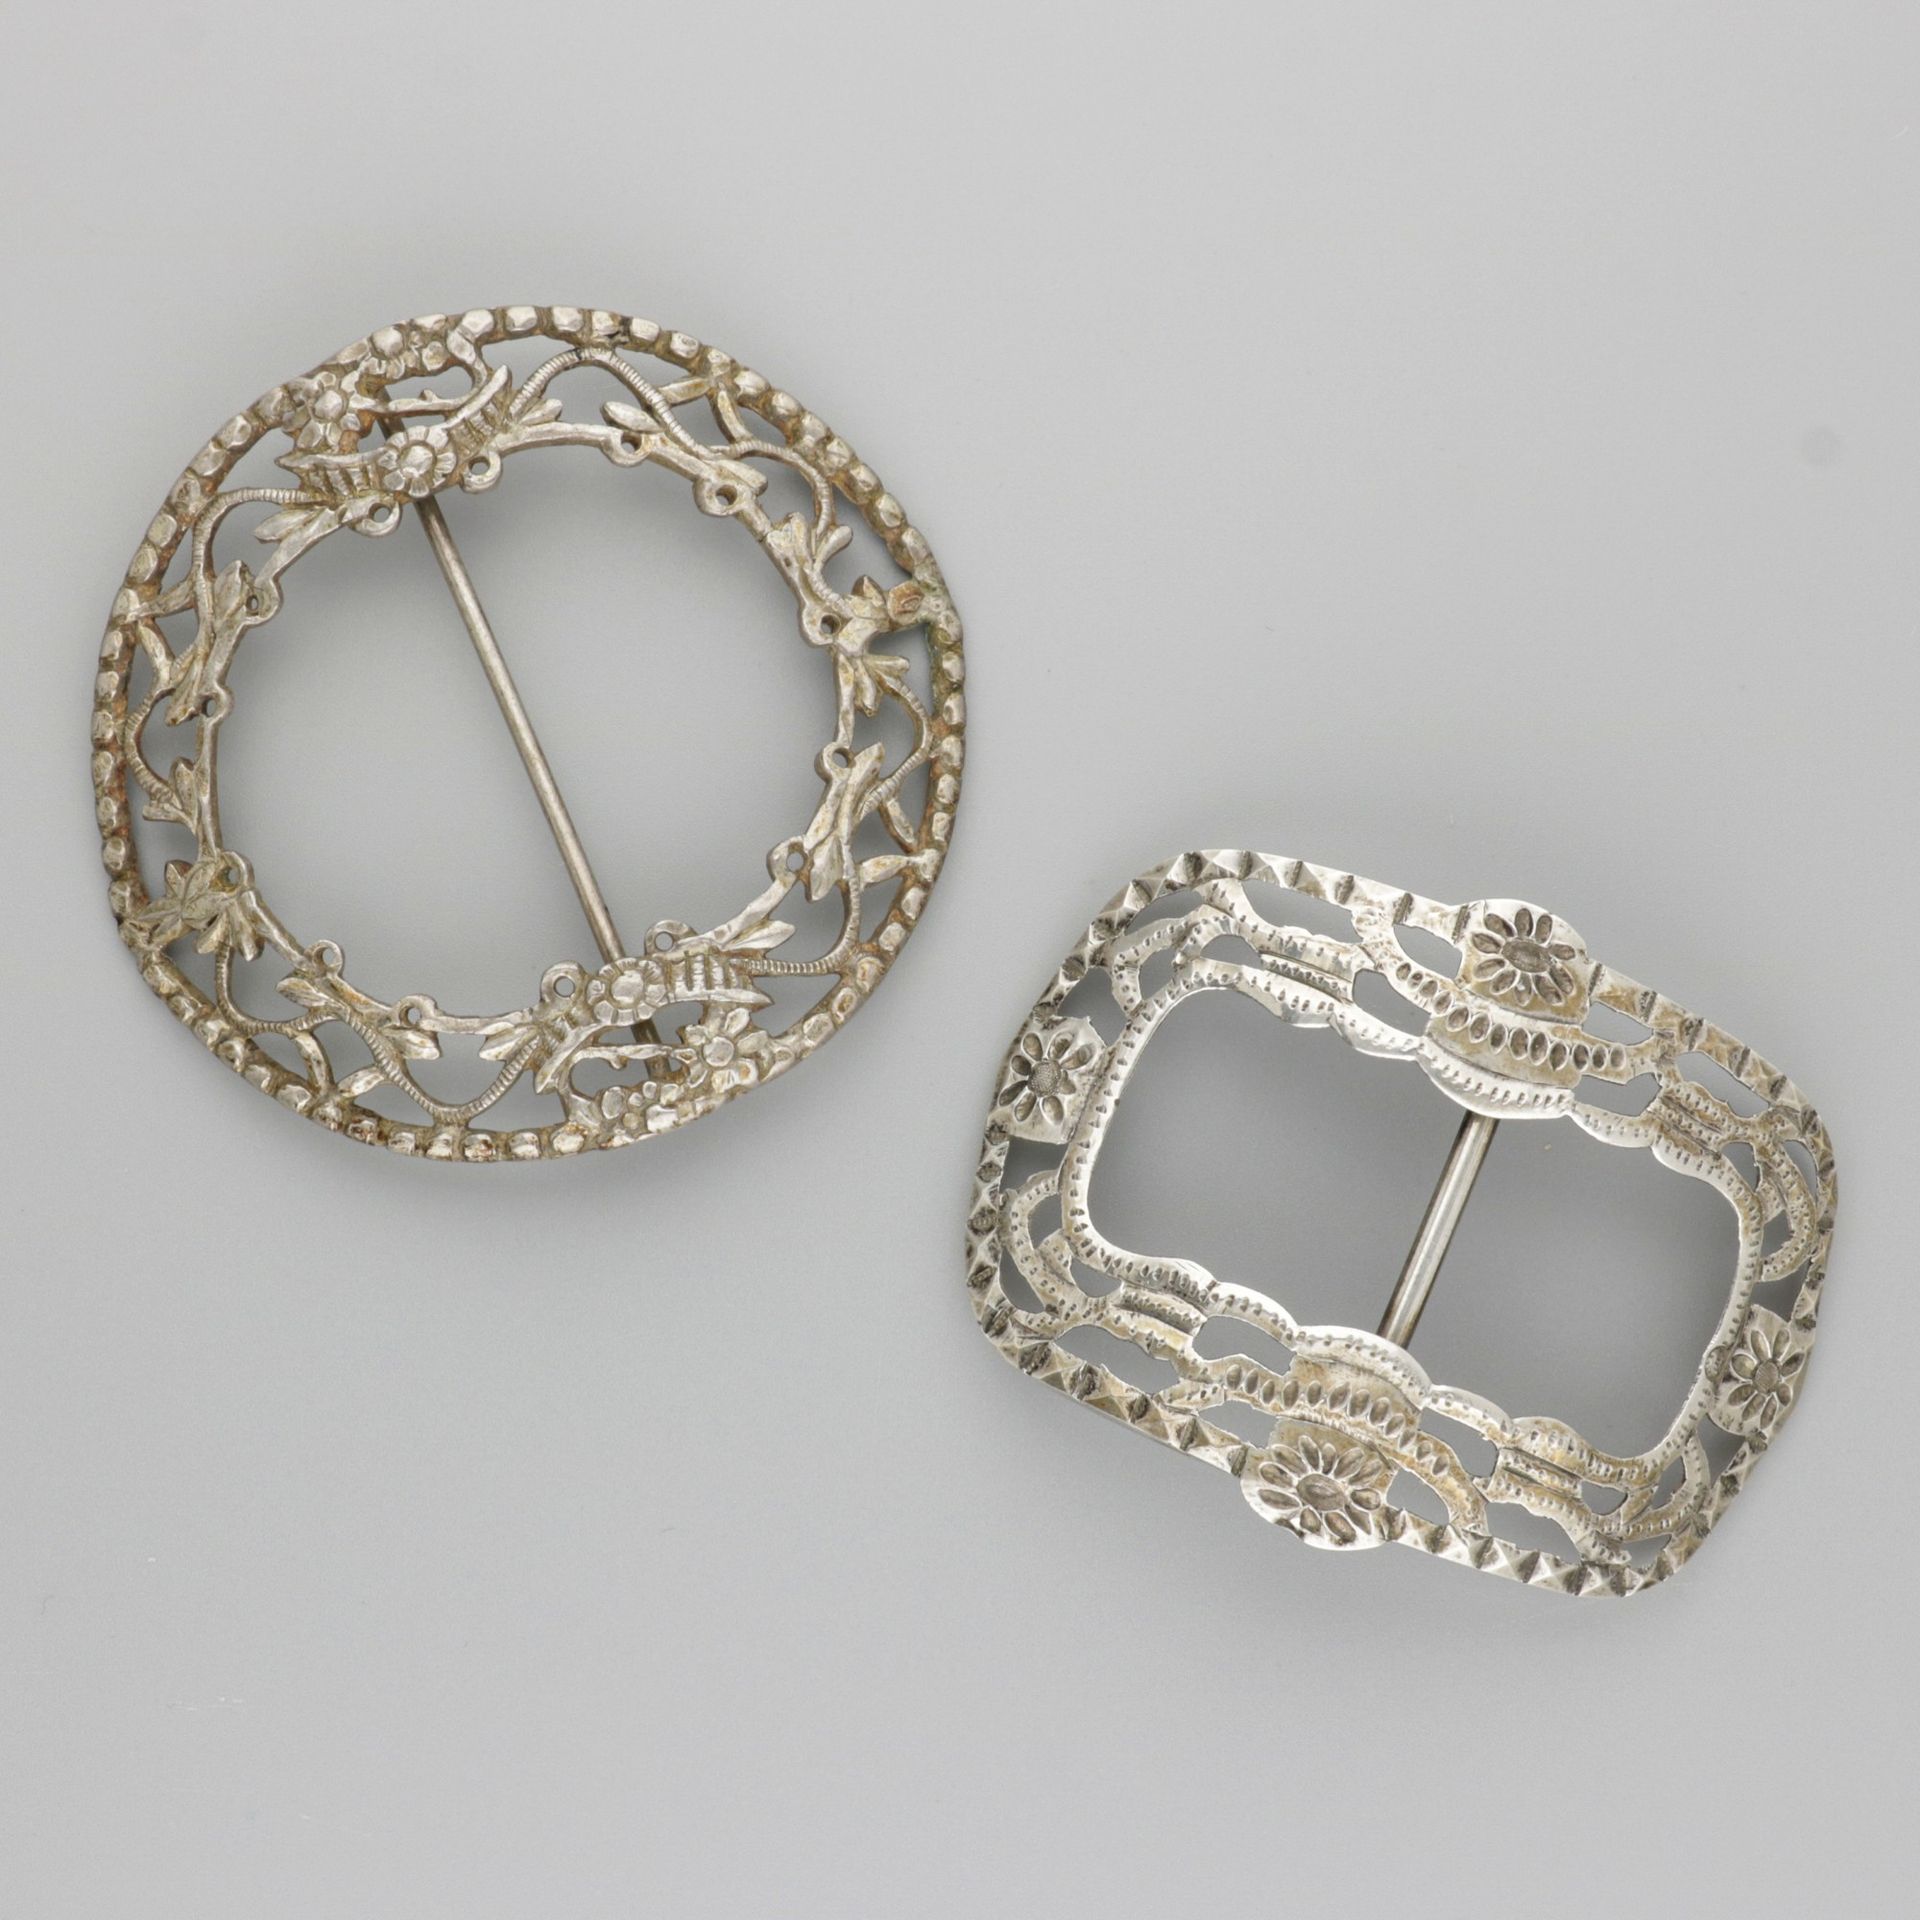 2-piece lot buckles silver. Round and rectangular model with molded decorations.&hellip;